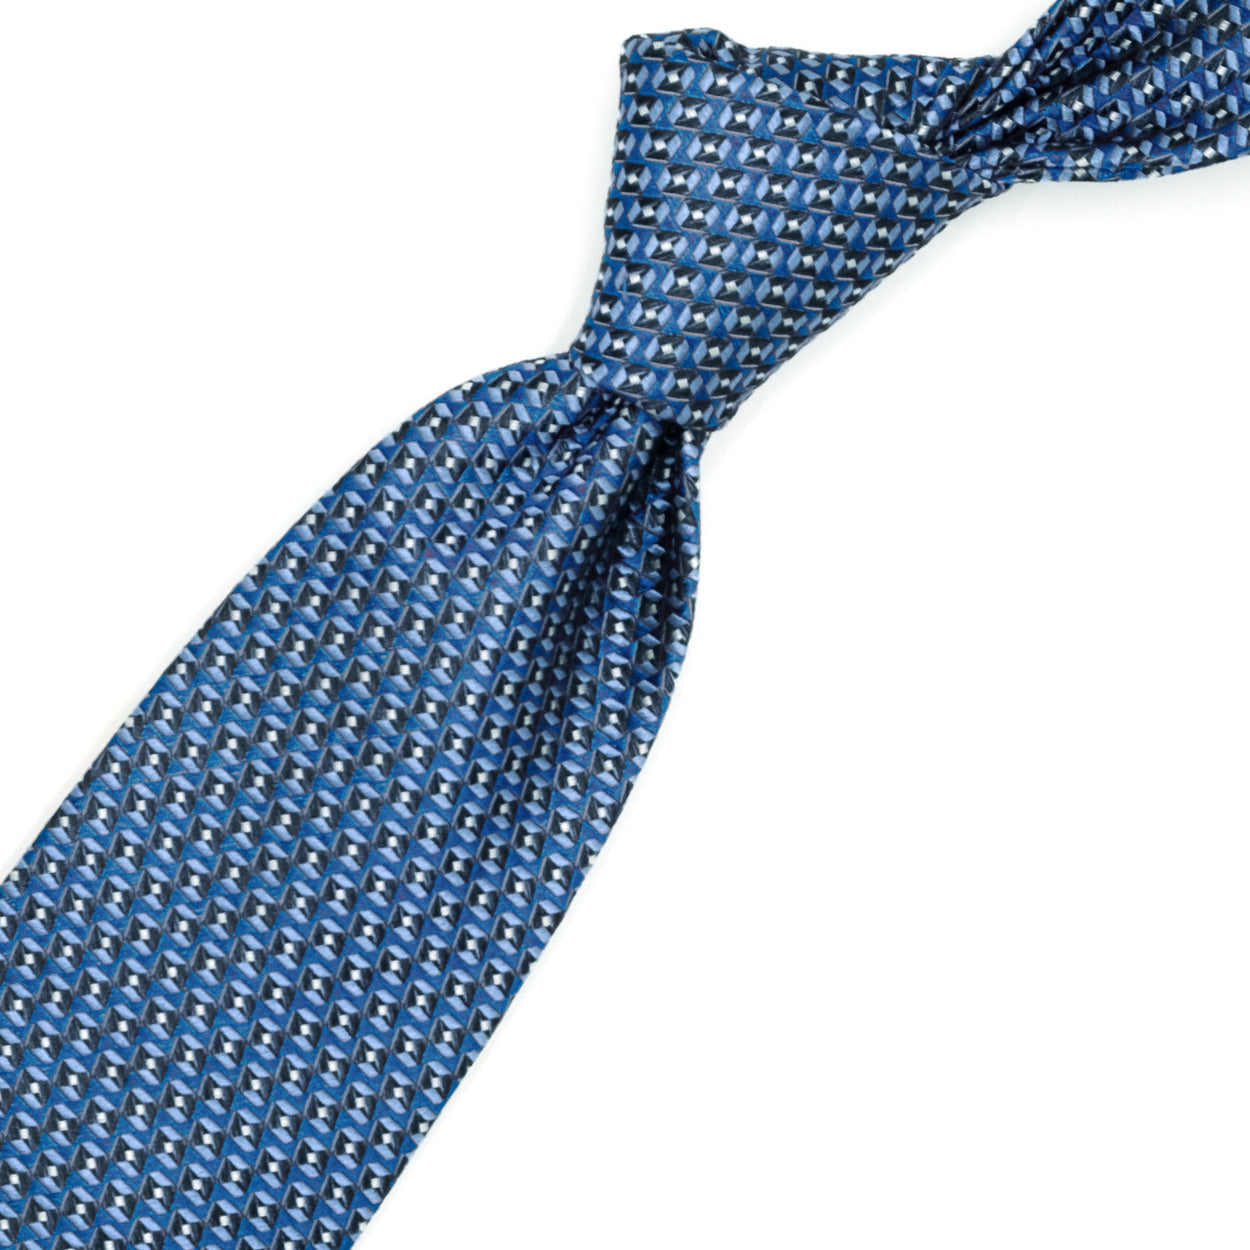 Light blue tie with blue, light blue and white geometric pattern